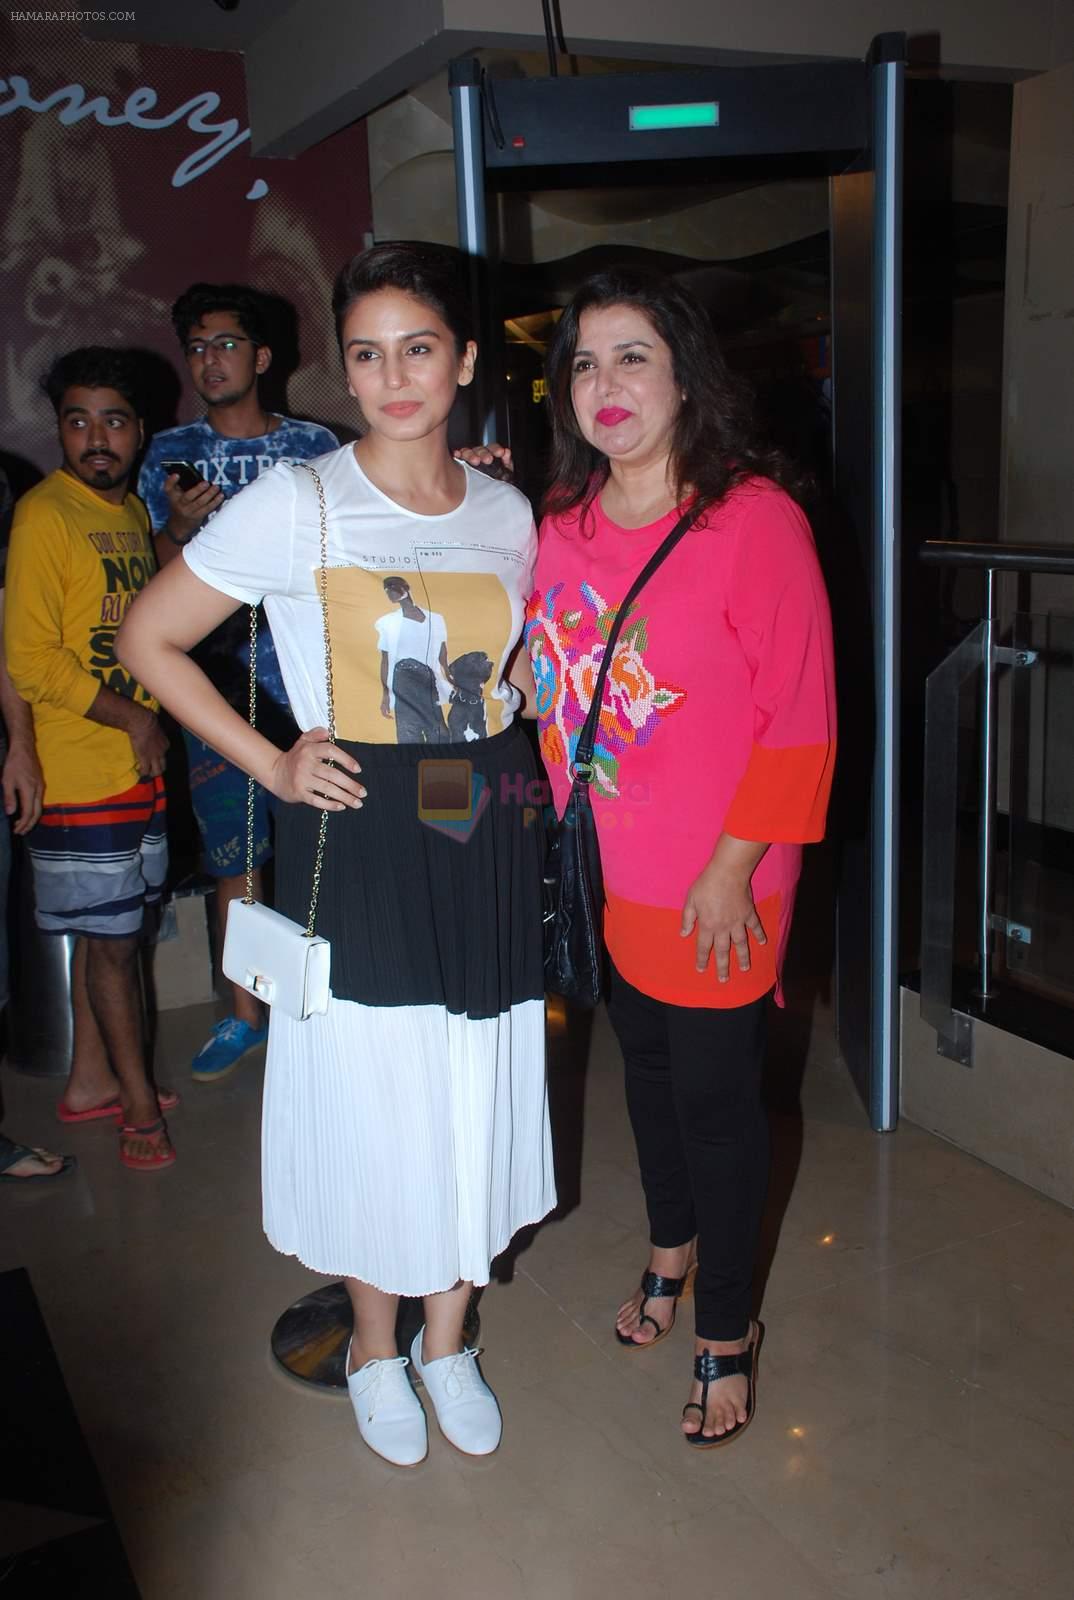 Huma Qureshi, Farah Khan at Avengers premiere in PVR on 22nd April 2015